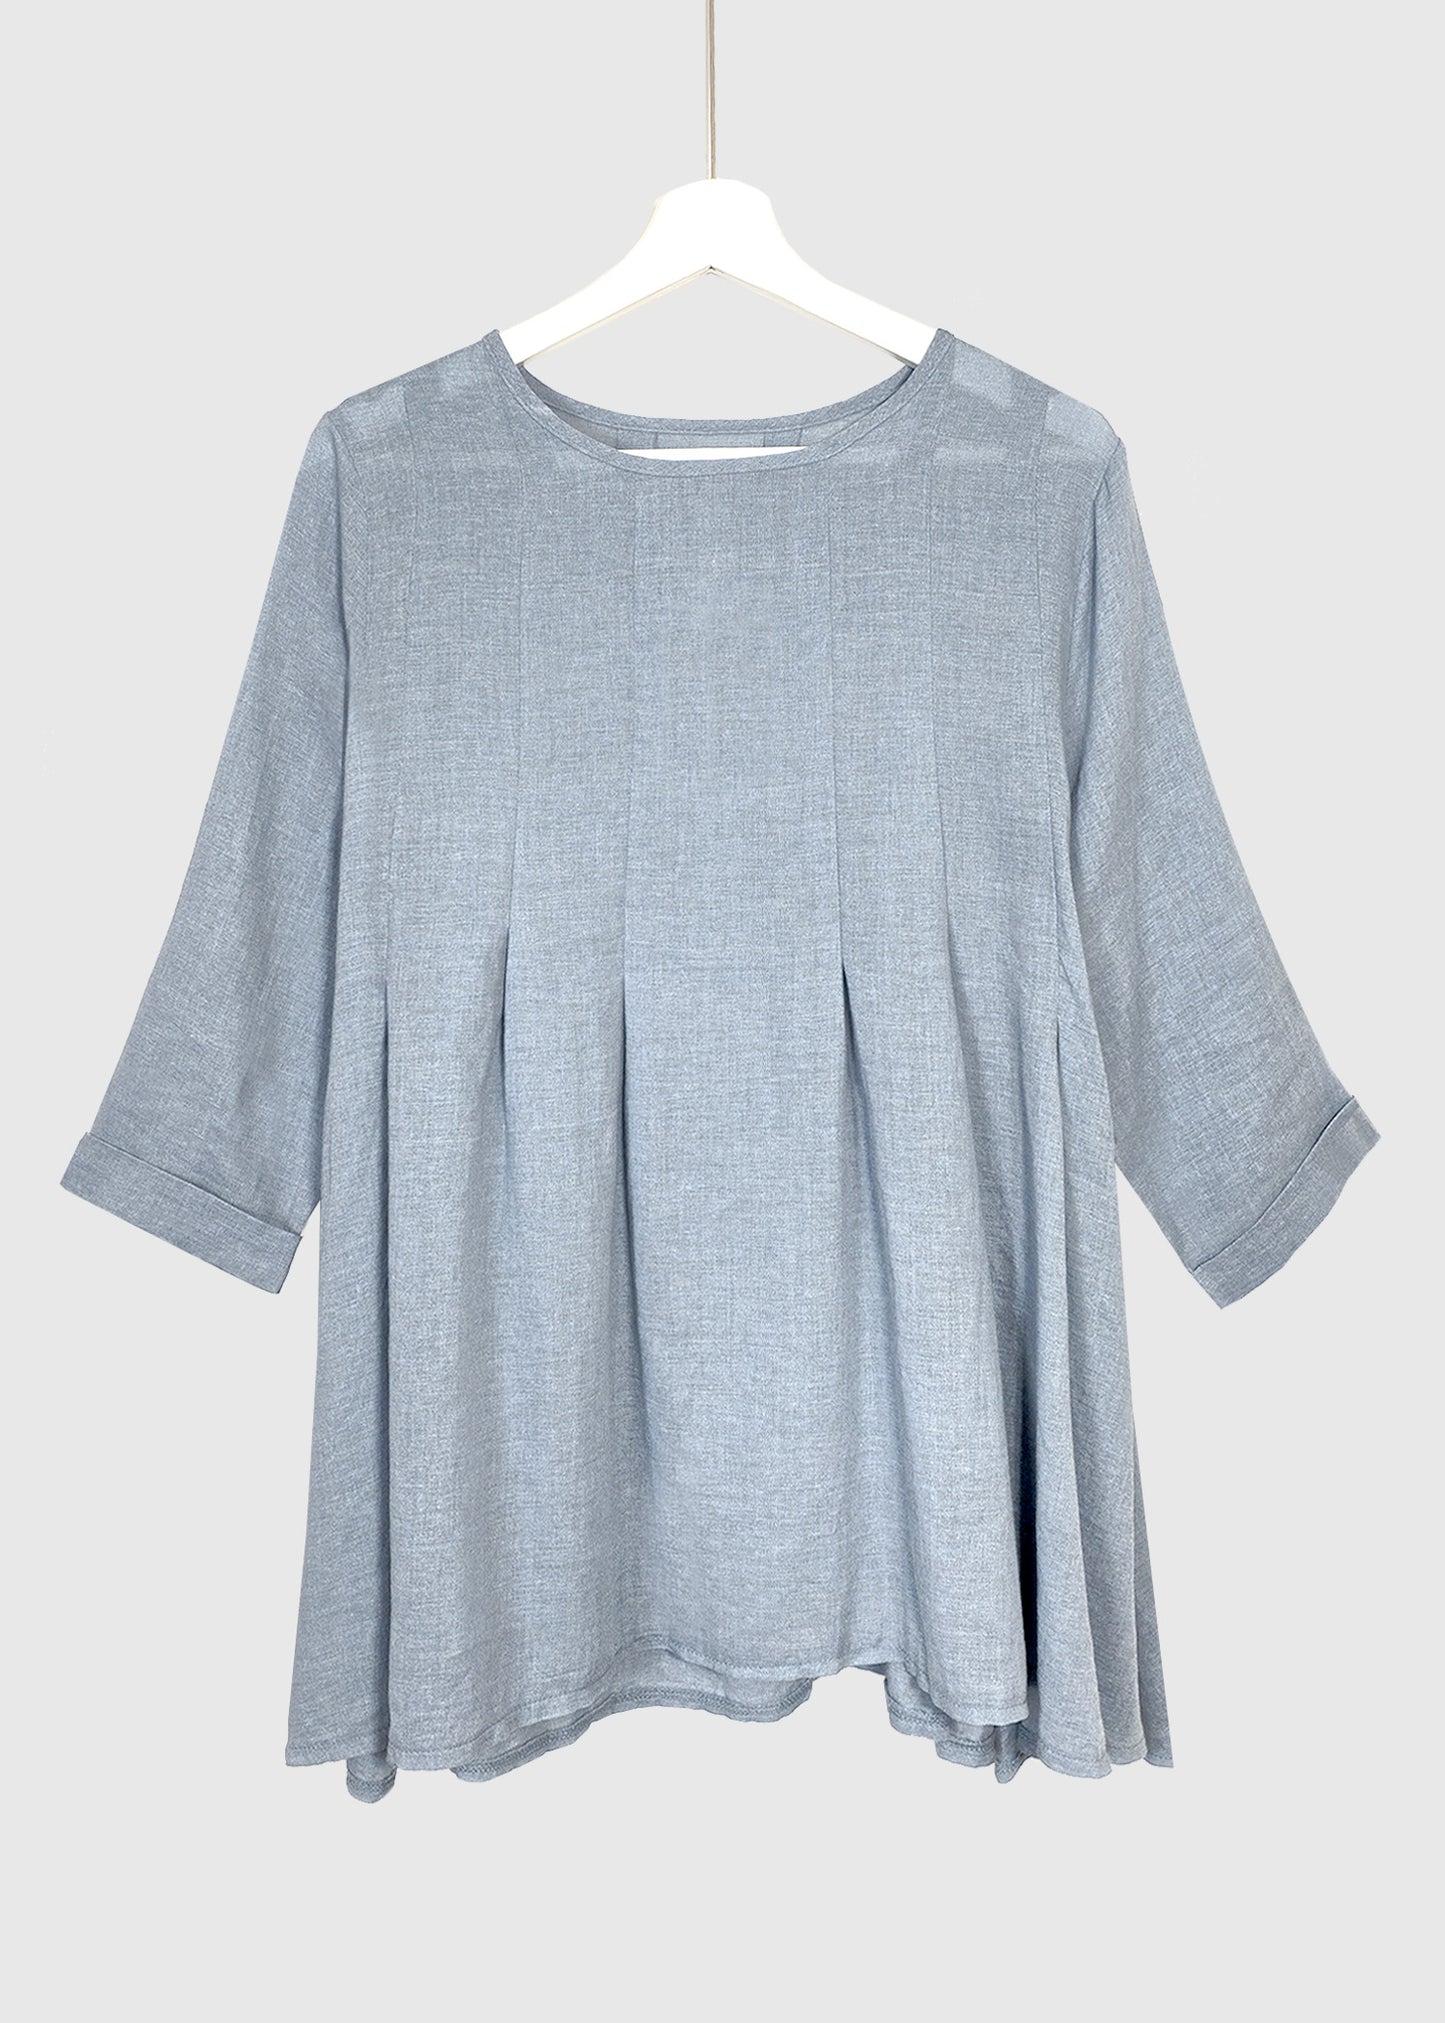 LILY Pleated Tunic Top